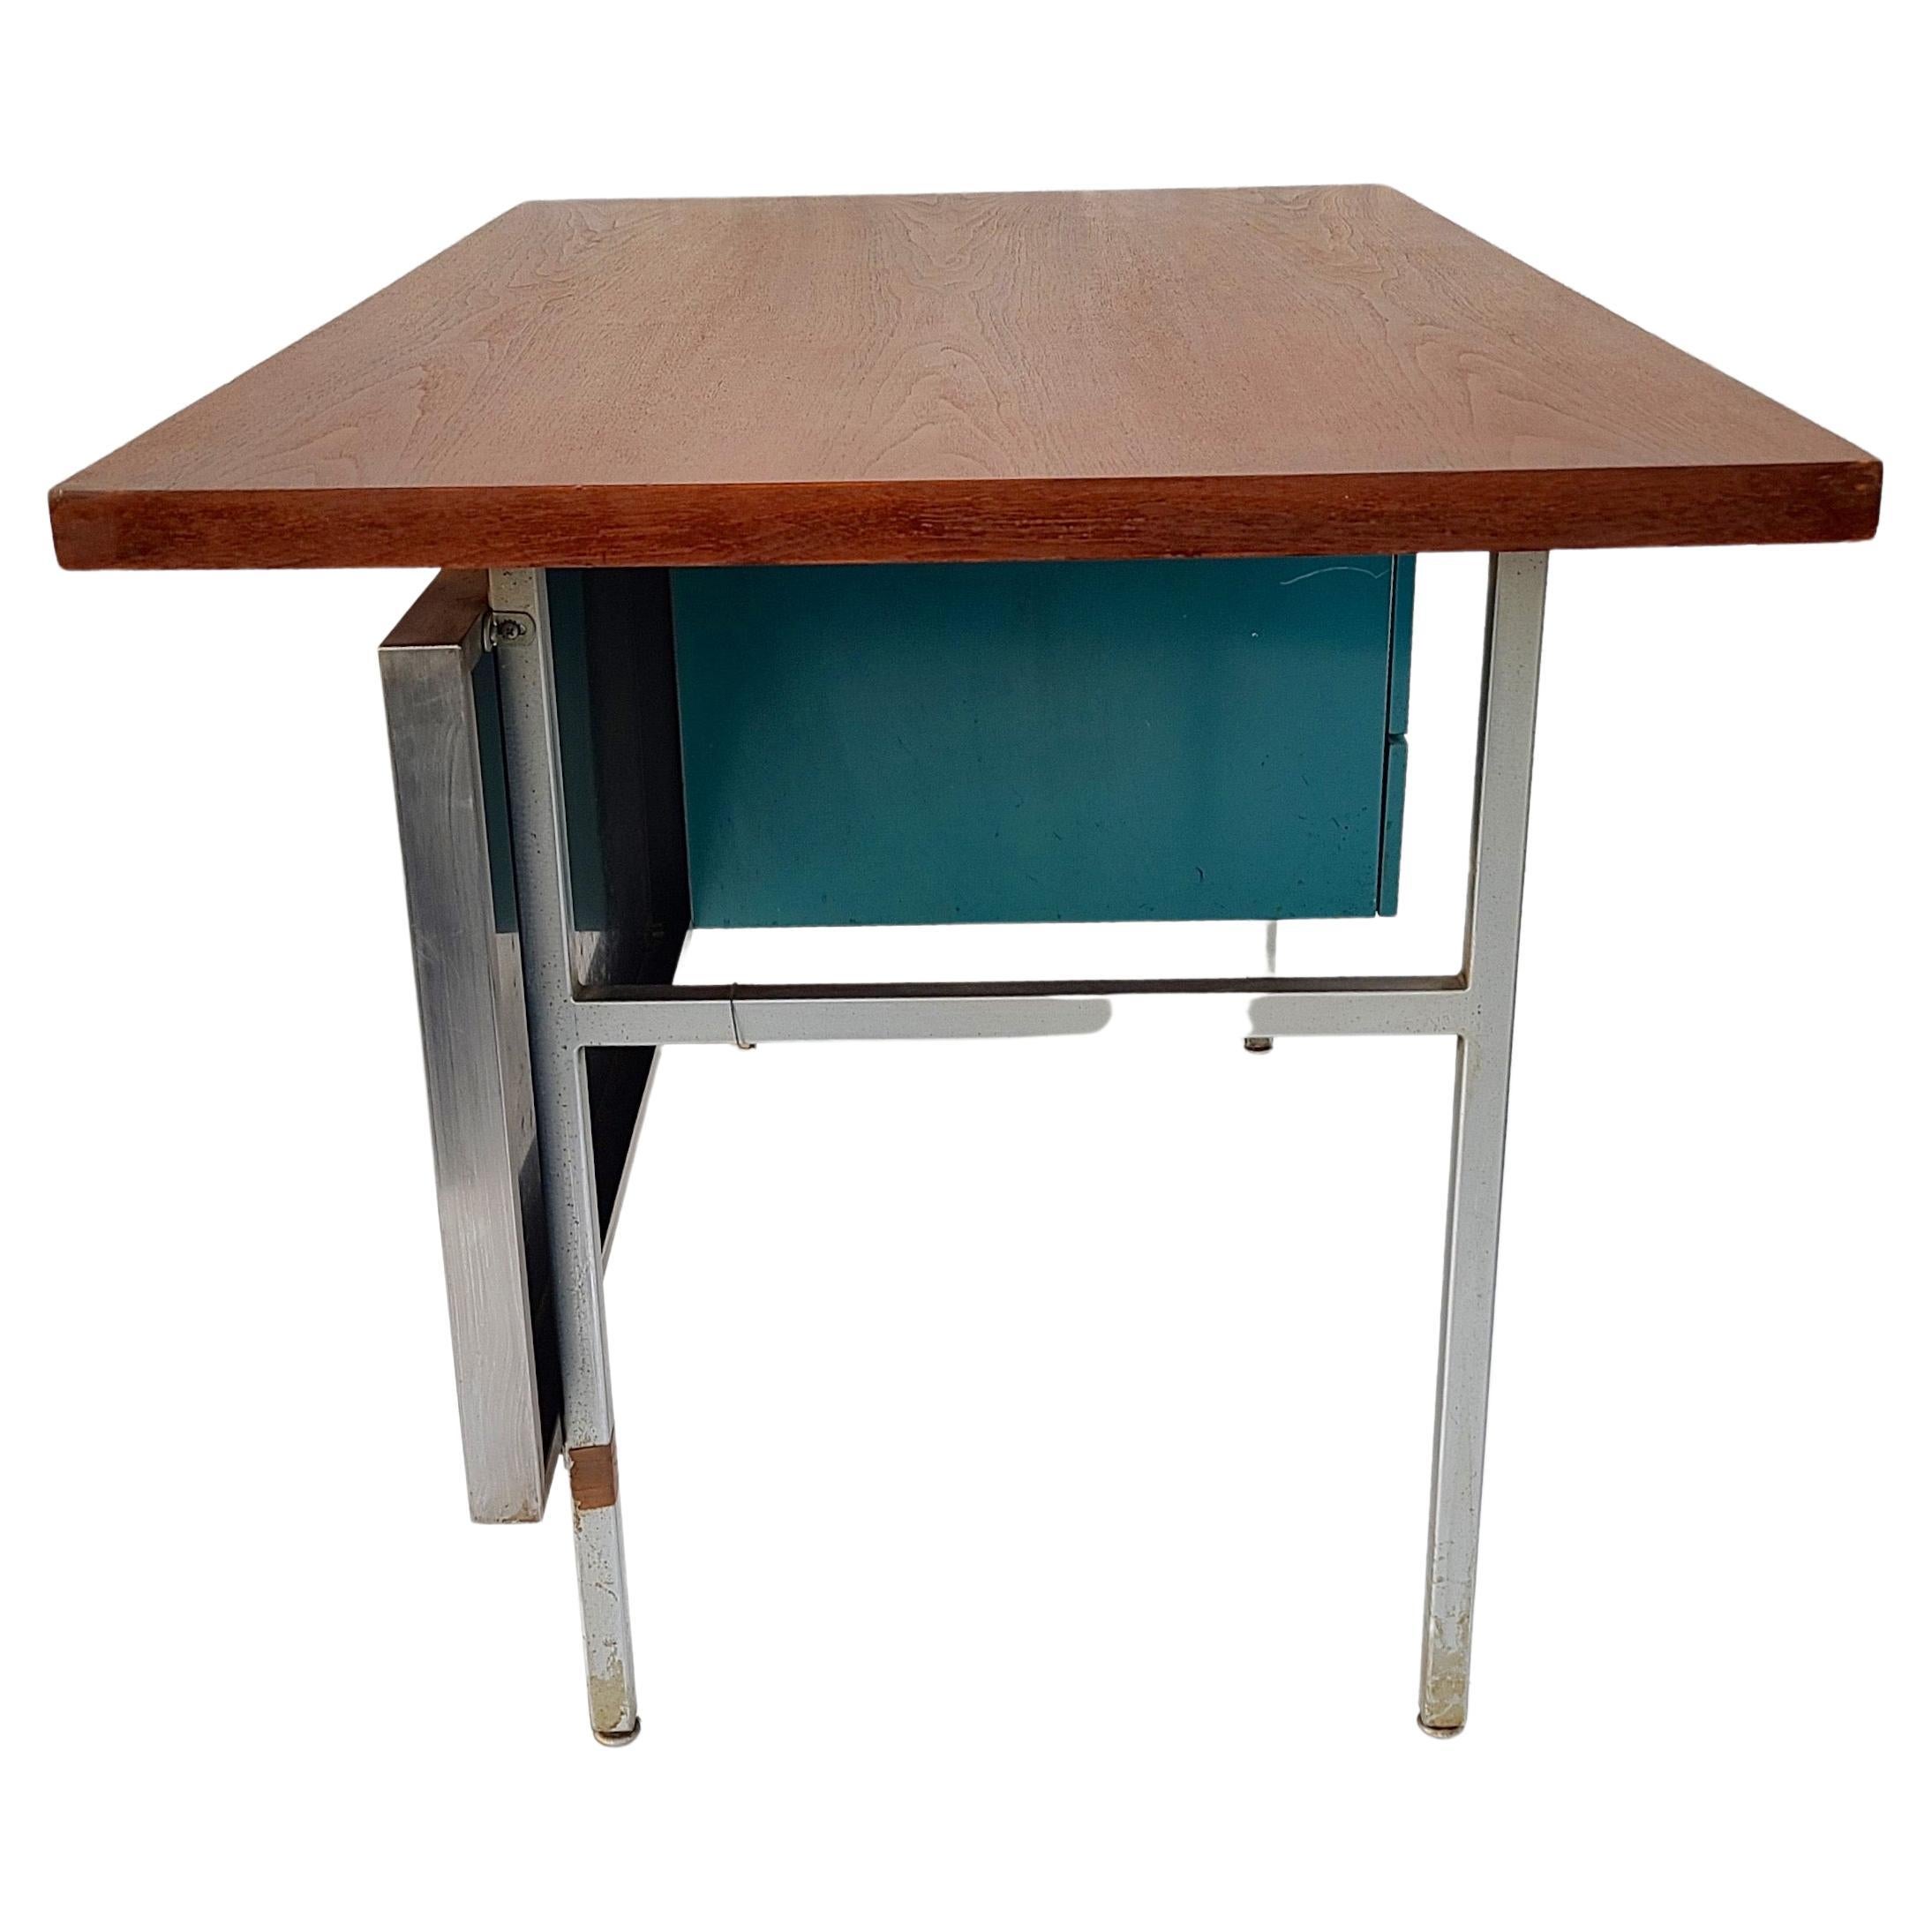 MMG Desk designed by George Nelson for Herman Miller.

Some collectors of George Nelson designs prefer some original condition.
This desk is a combination. The top has been refinished to remove some stains.
The approach we use is minimally